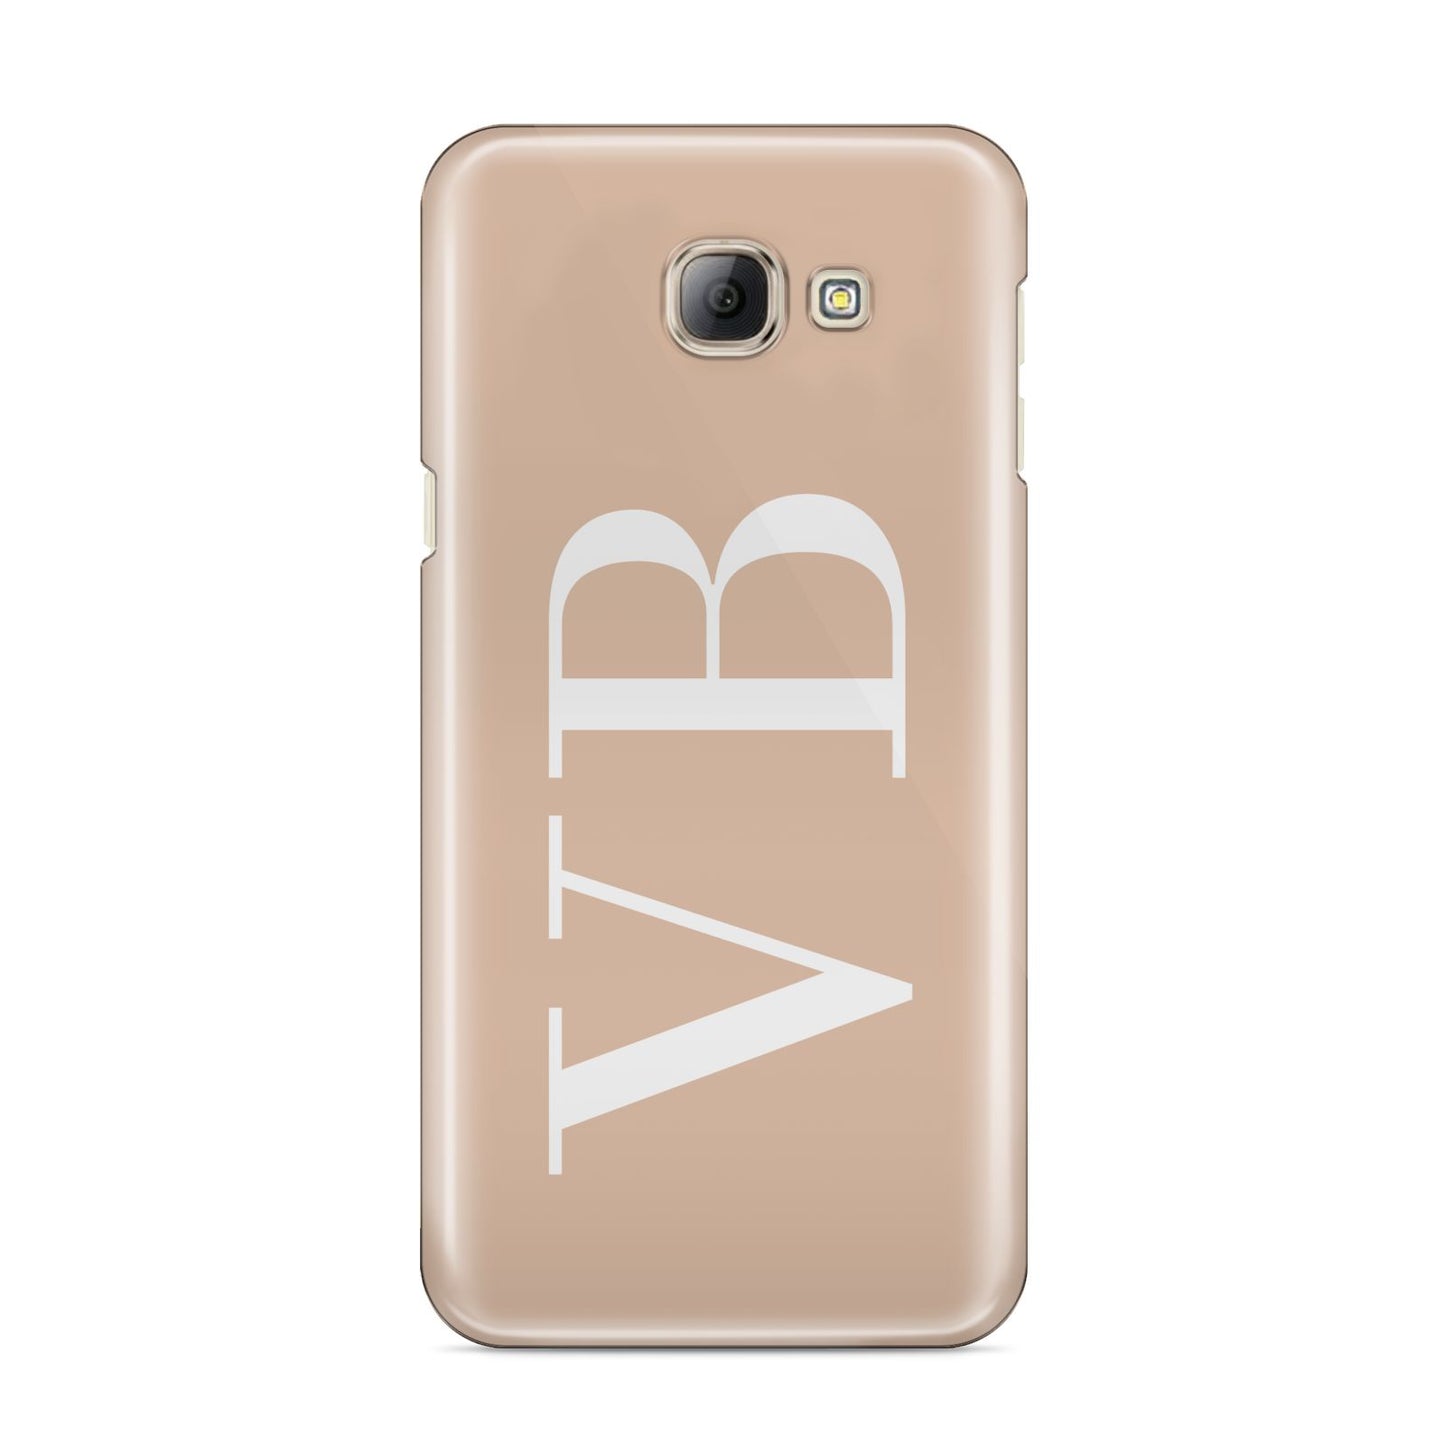 Nude And White Personalised Samsung Galaxy A8 2016 Case